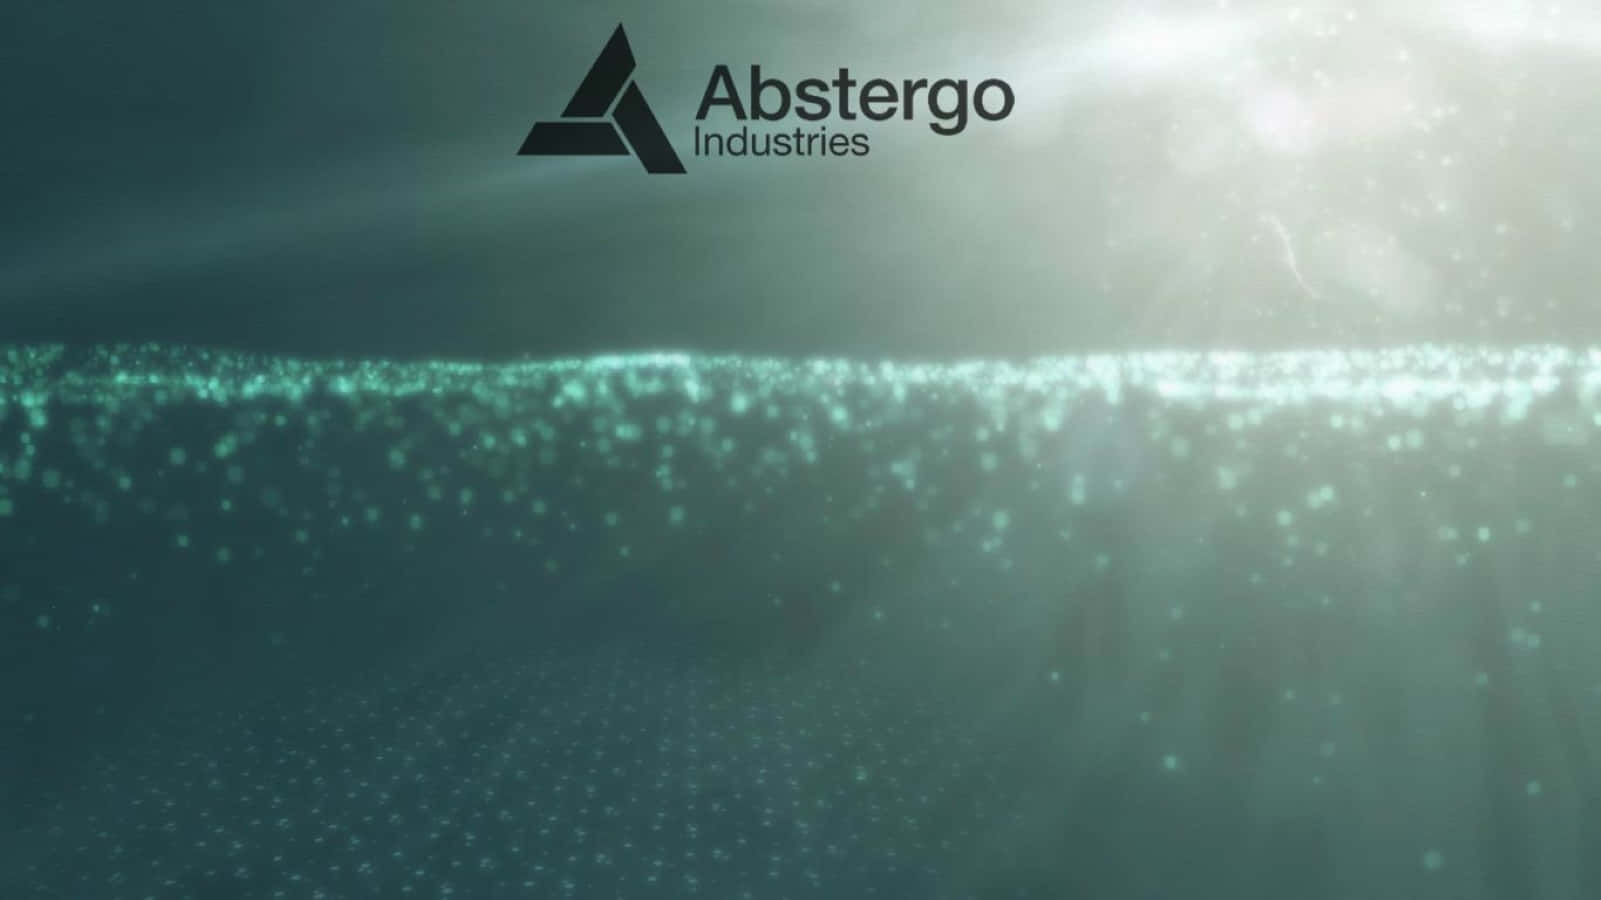 Abstergo Industries Logo on a Futuristic Background Wallpaper